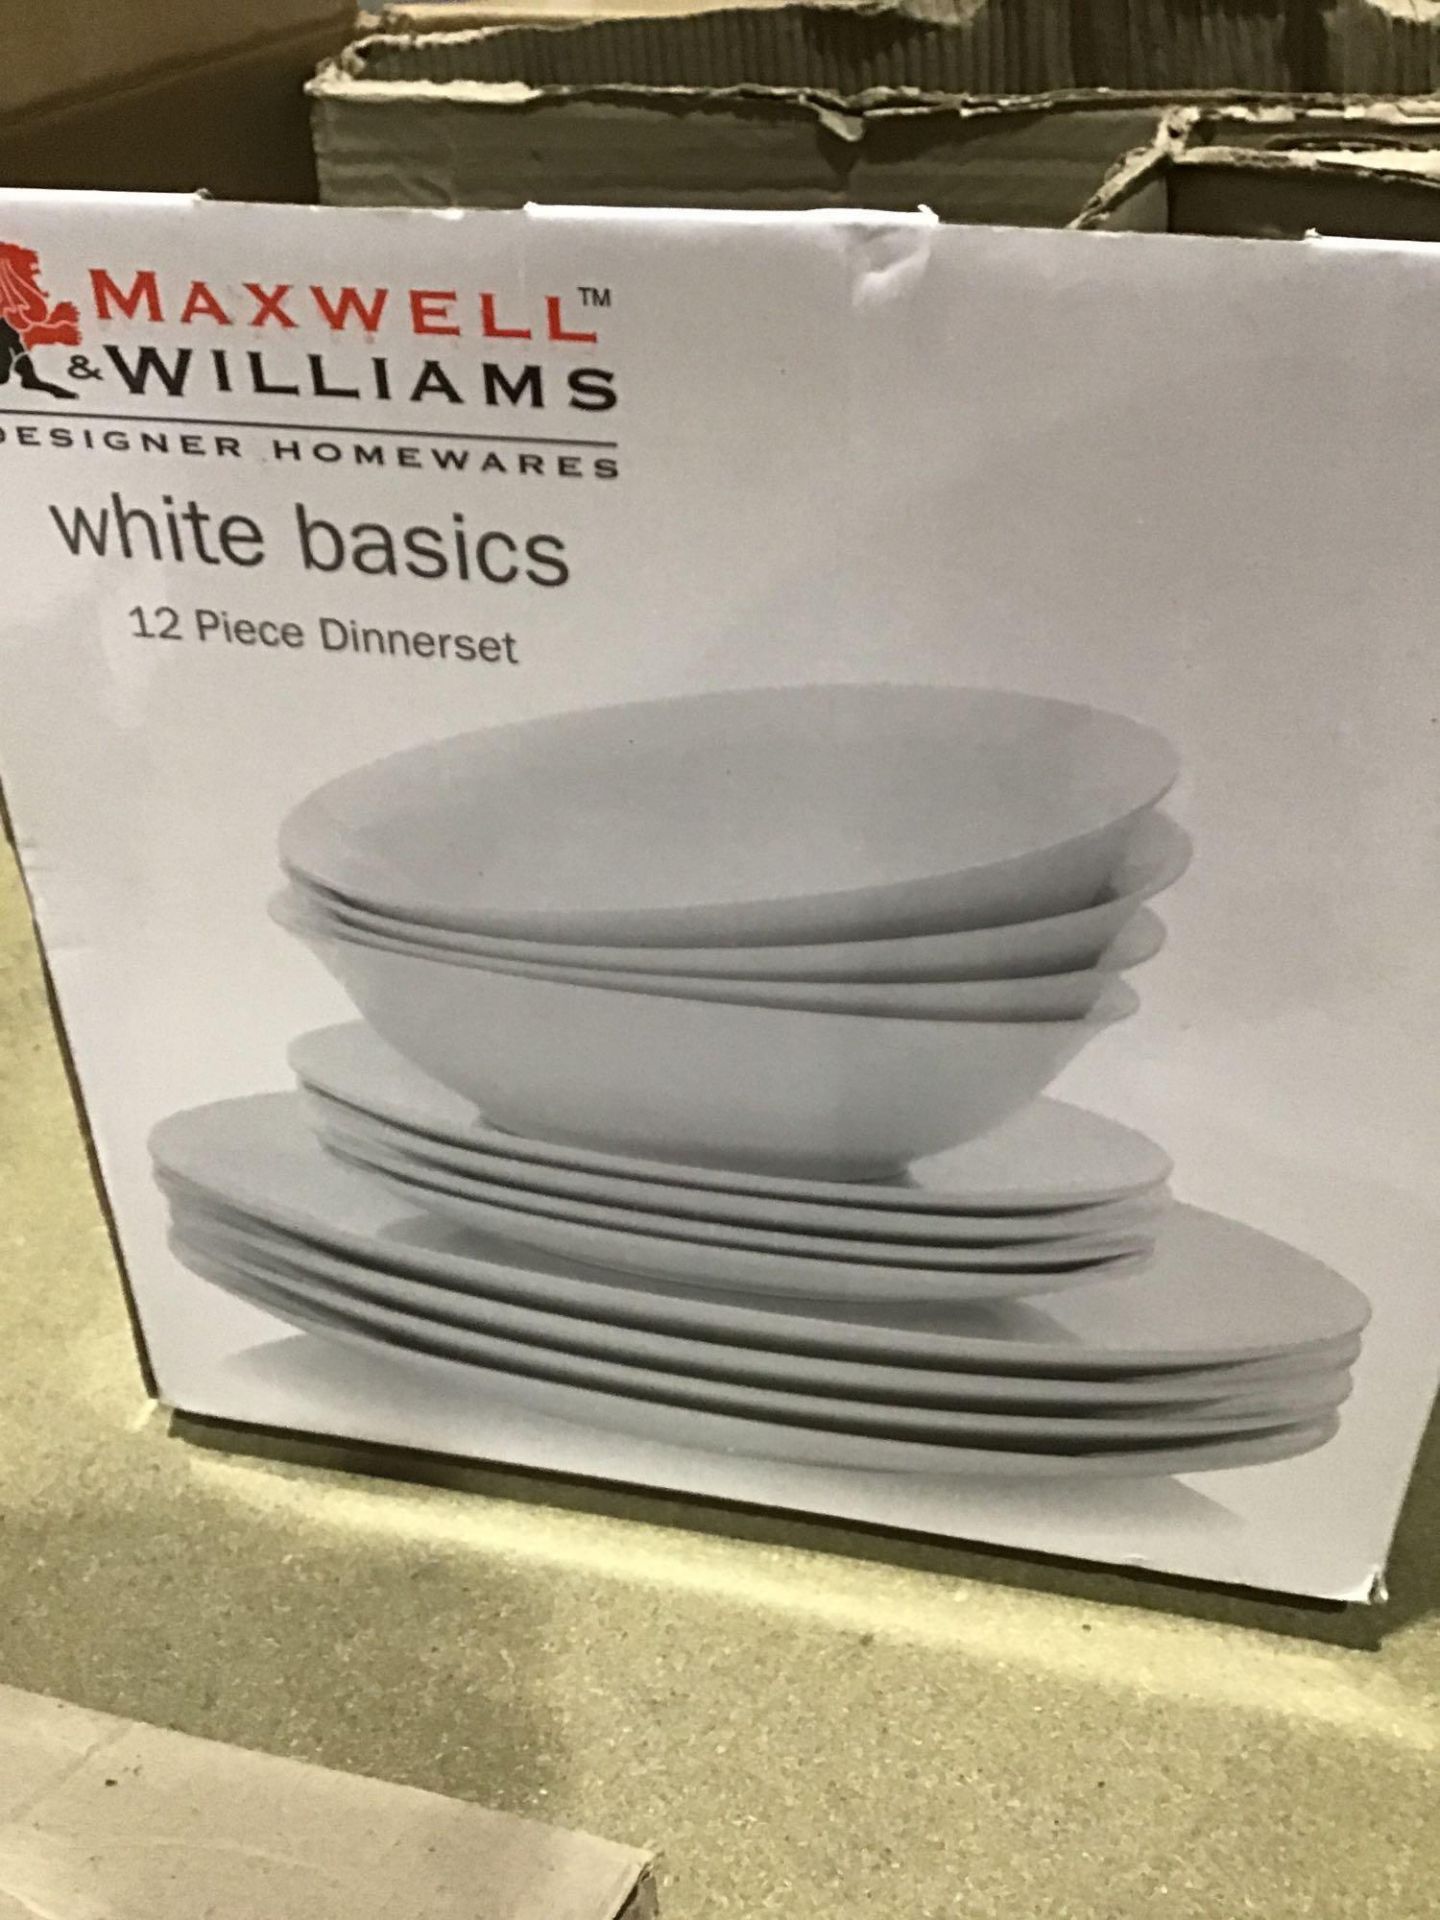 Maxwell and Williams White Basics Coupe 12 Piece Dinner Set - Image 3 of 4